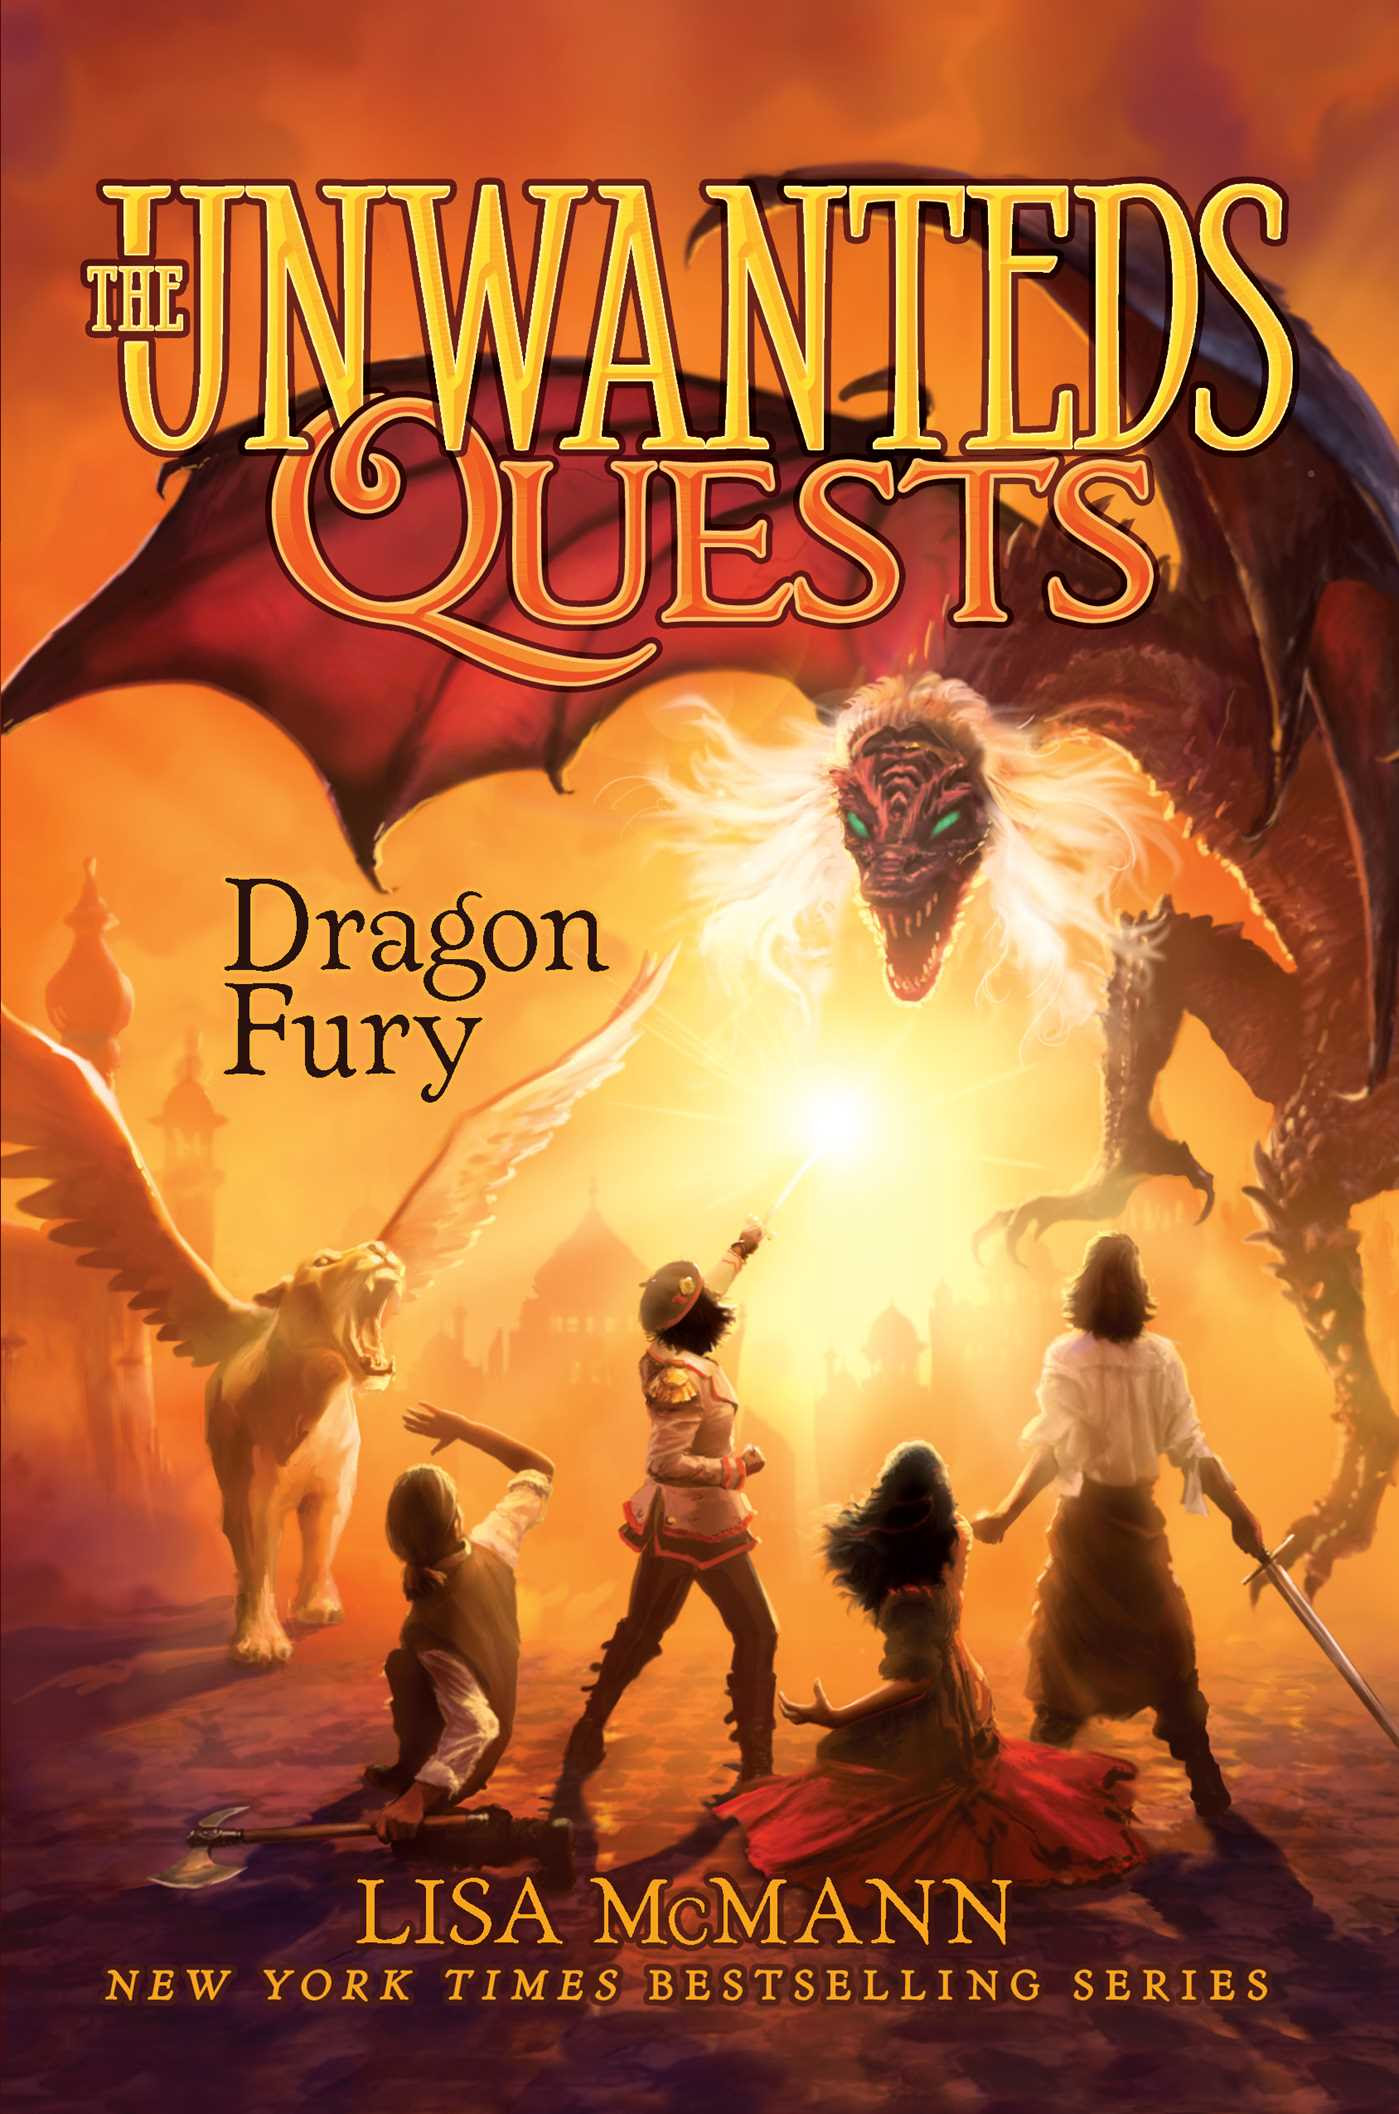 Dragon Fury  (The Unwanteds Quests, #7) PDF